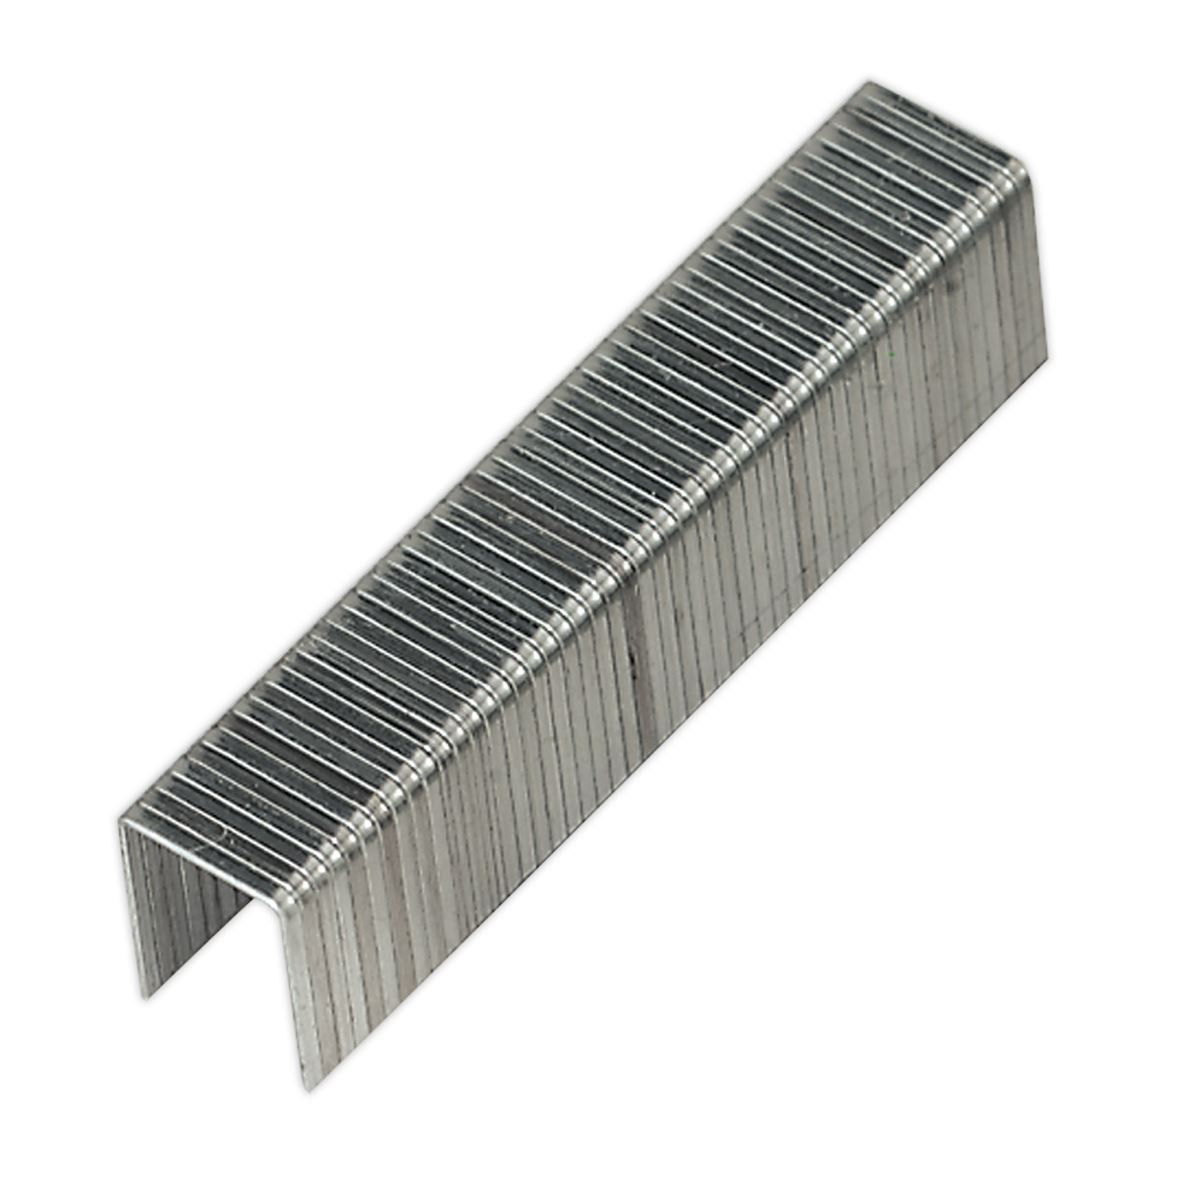 Sealey Staples 14mm Pack of 500